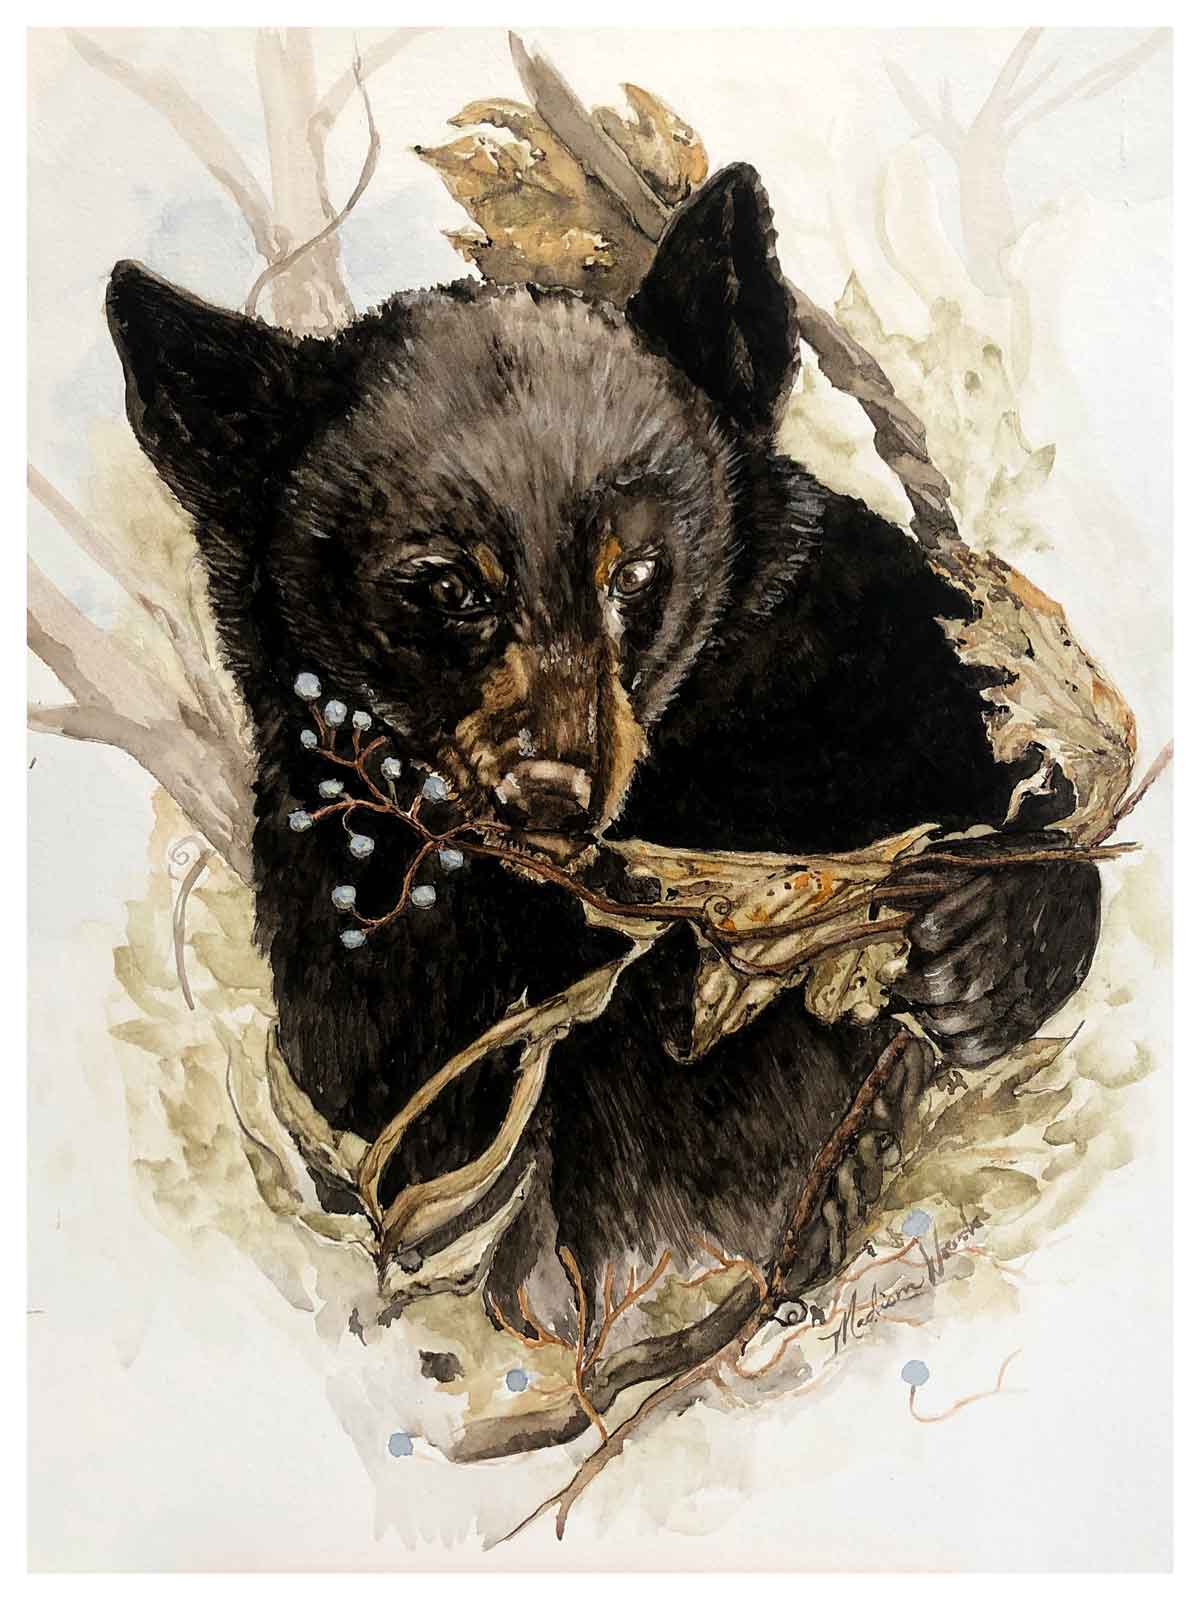 The bear painting by Madison Woods.